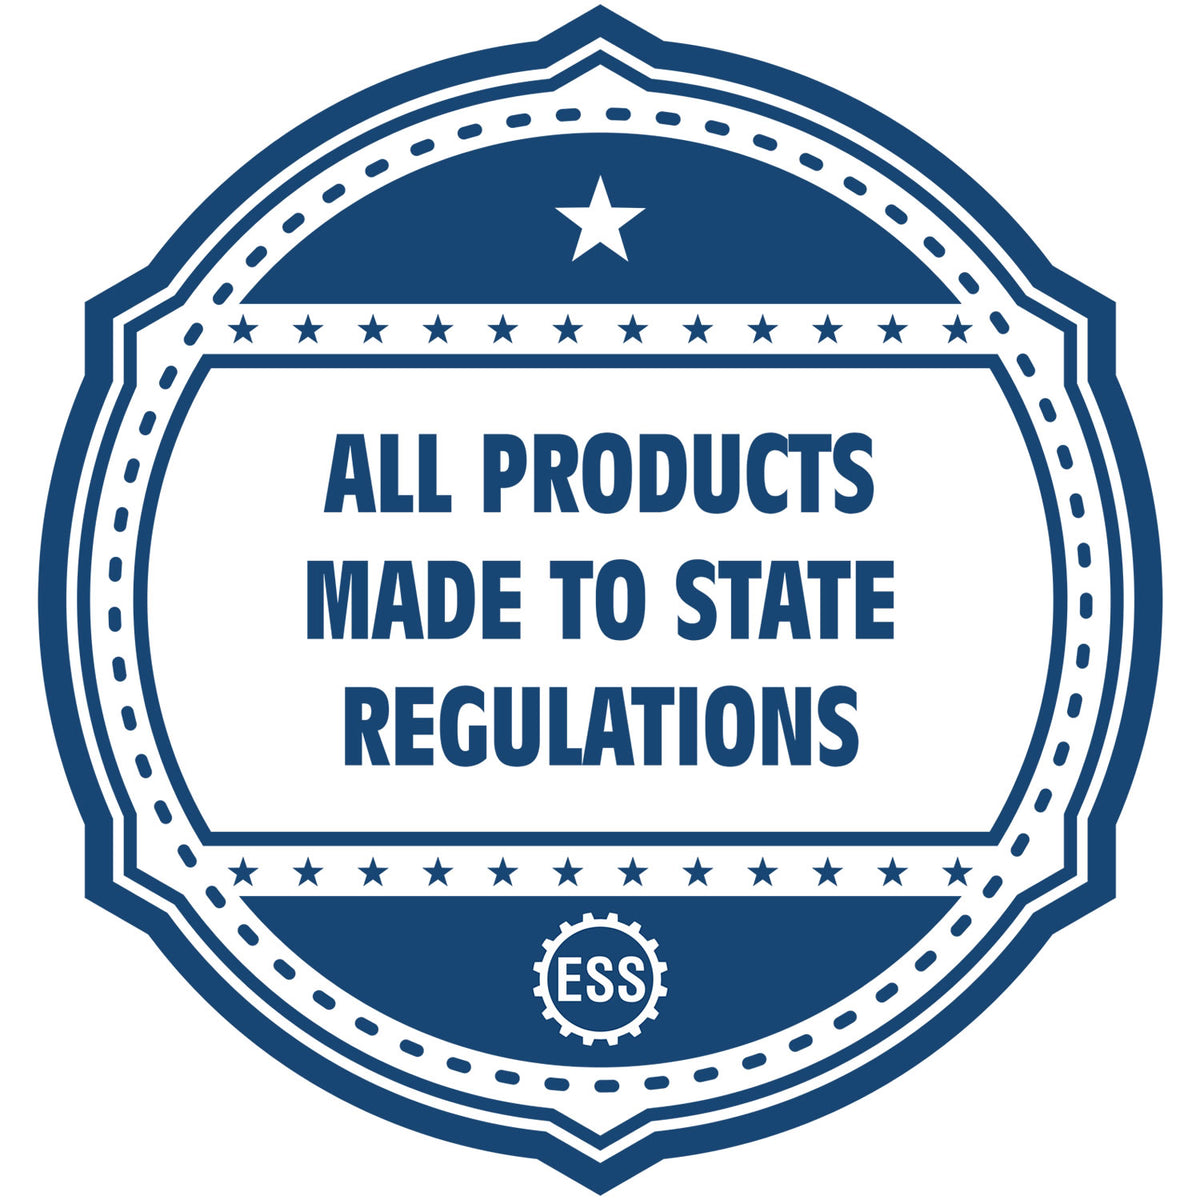 An icon or badge element for the Virginia Professional Engineer Seal Stamp showing that this product is made in compliance with state regulations.